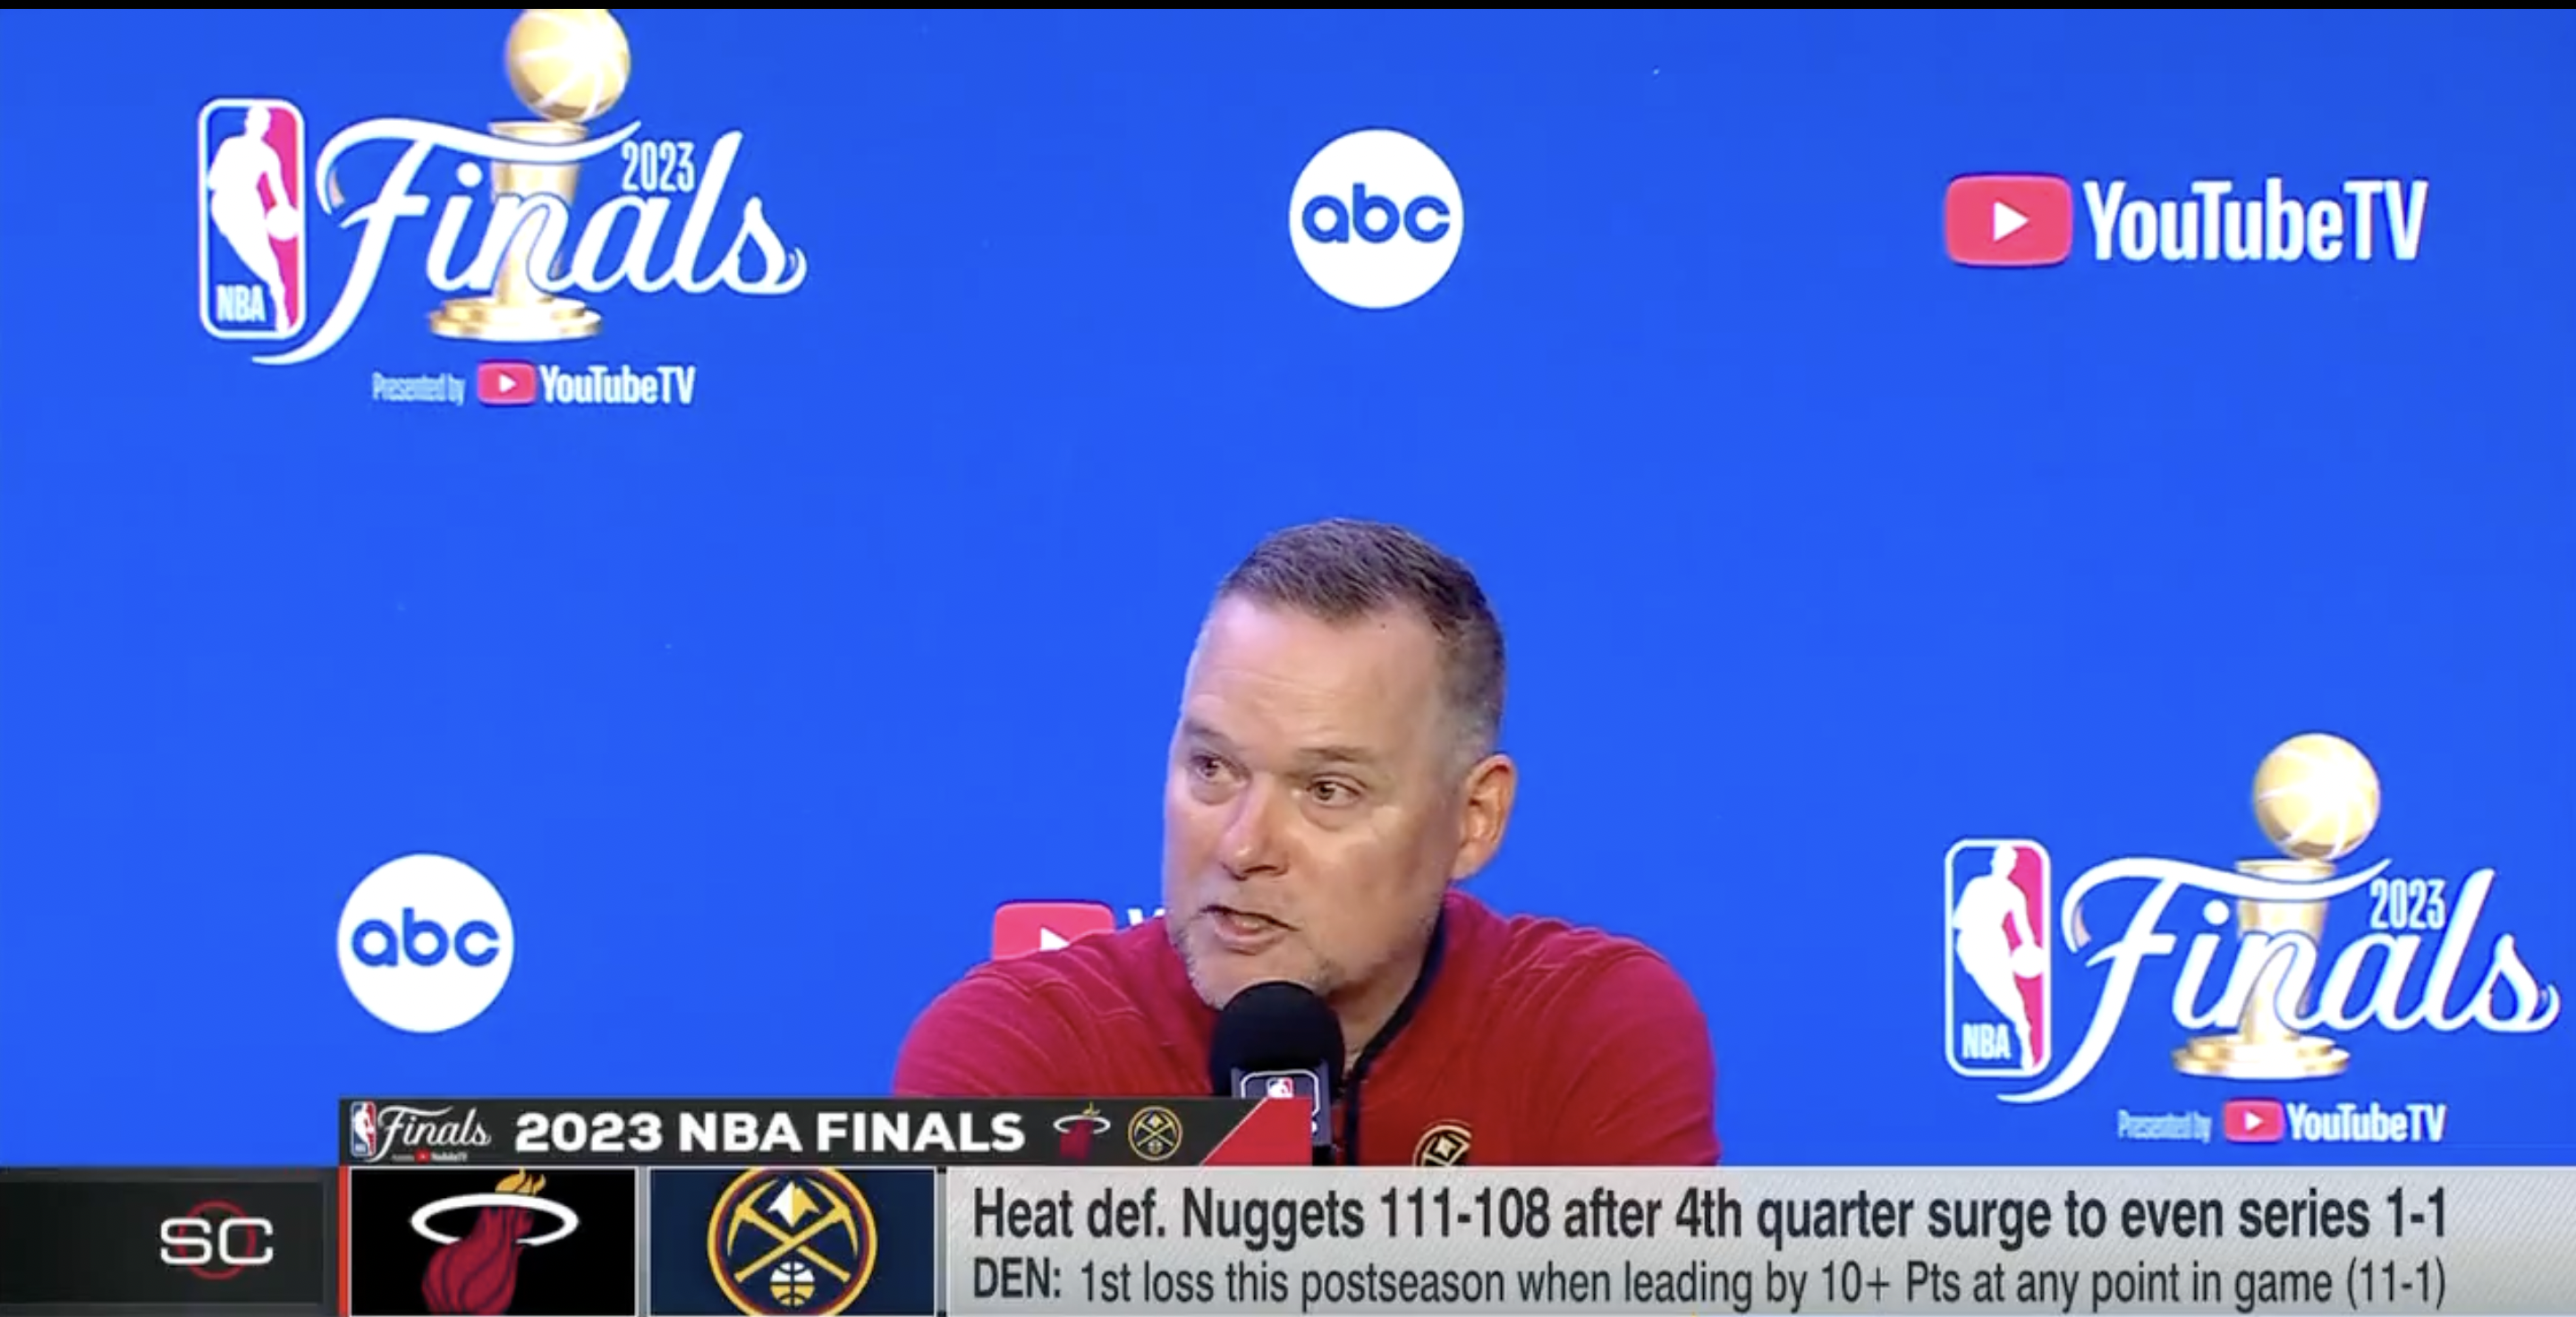 Nuggets head coach Mike Malone after their Game 2 loss in the 2023 NBA Finals.